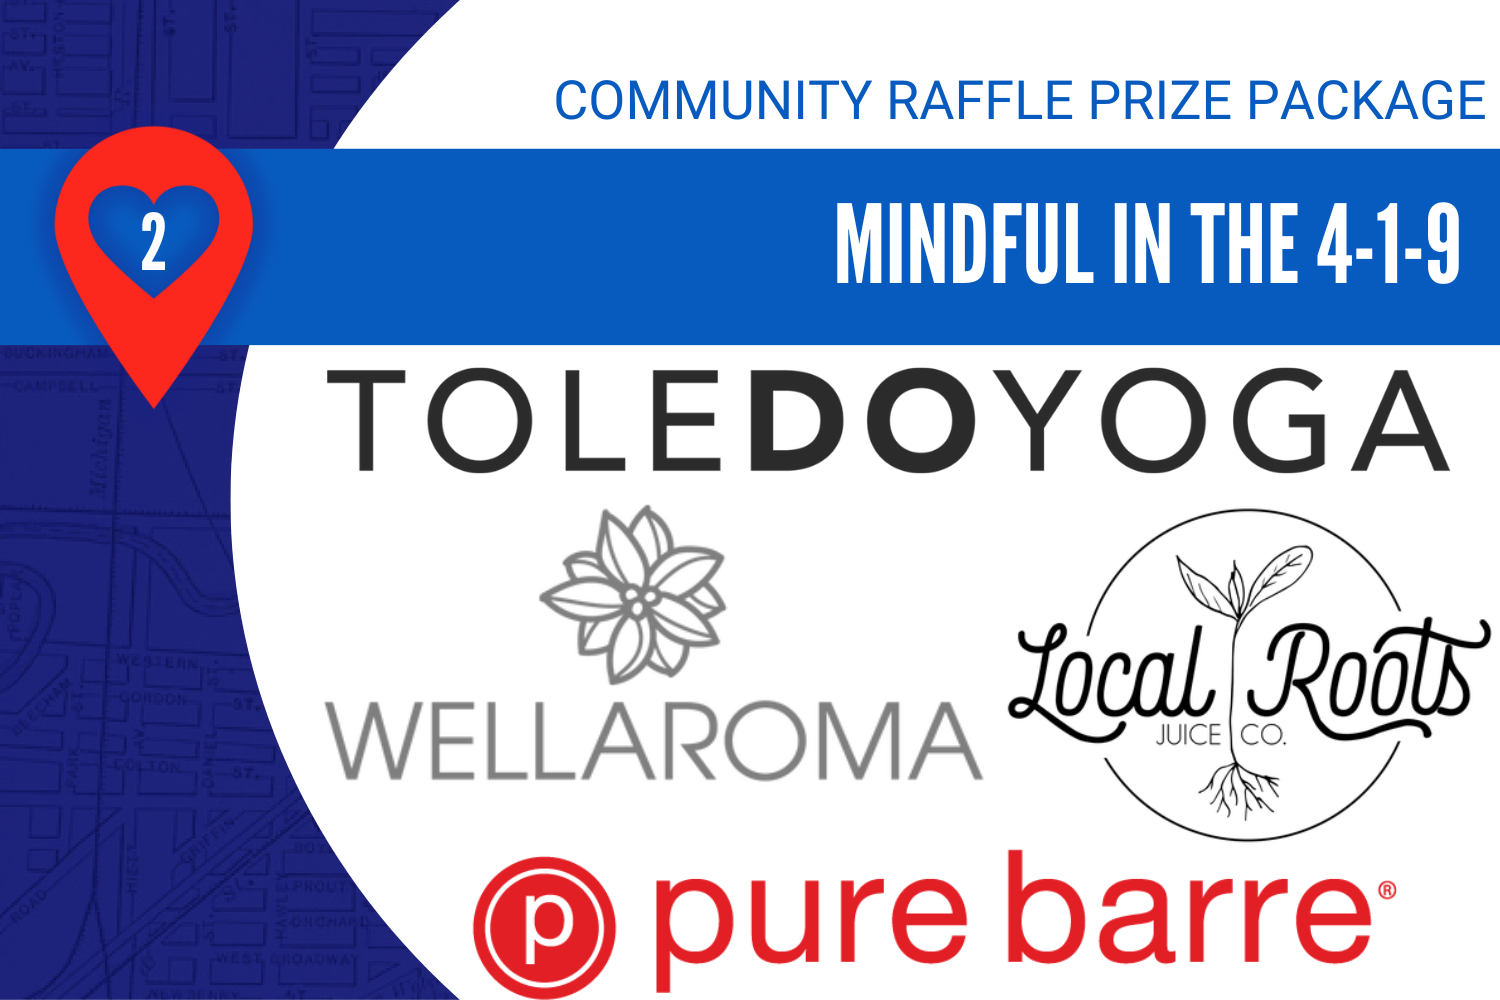 Community Raffle Package 2, Mindful in the 419. Includes logos for Hilton Garden Inn, Toledo Yoga, Local Roots Juice Company, and Wellaroma